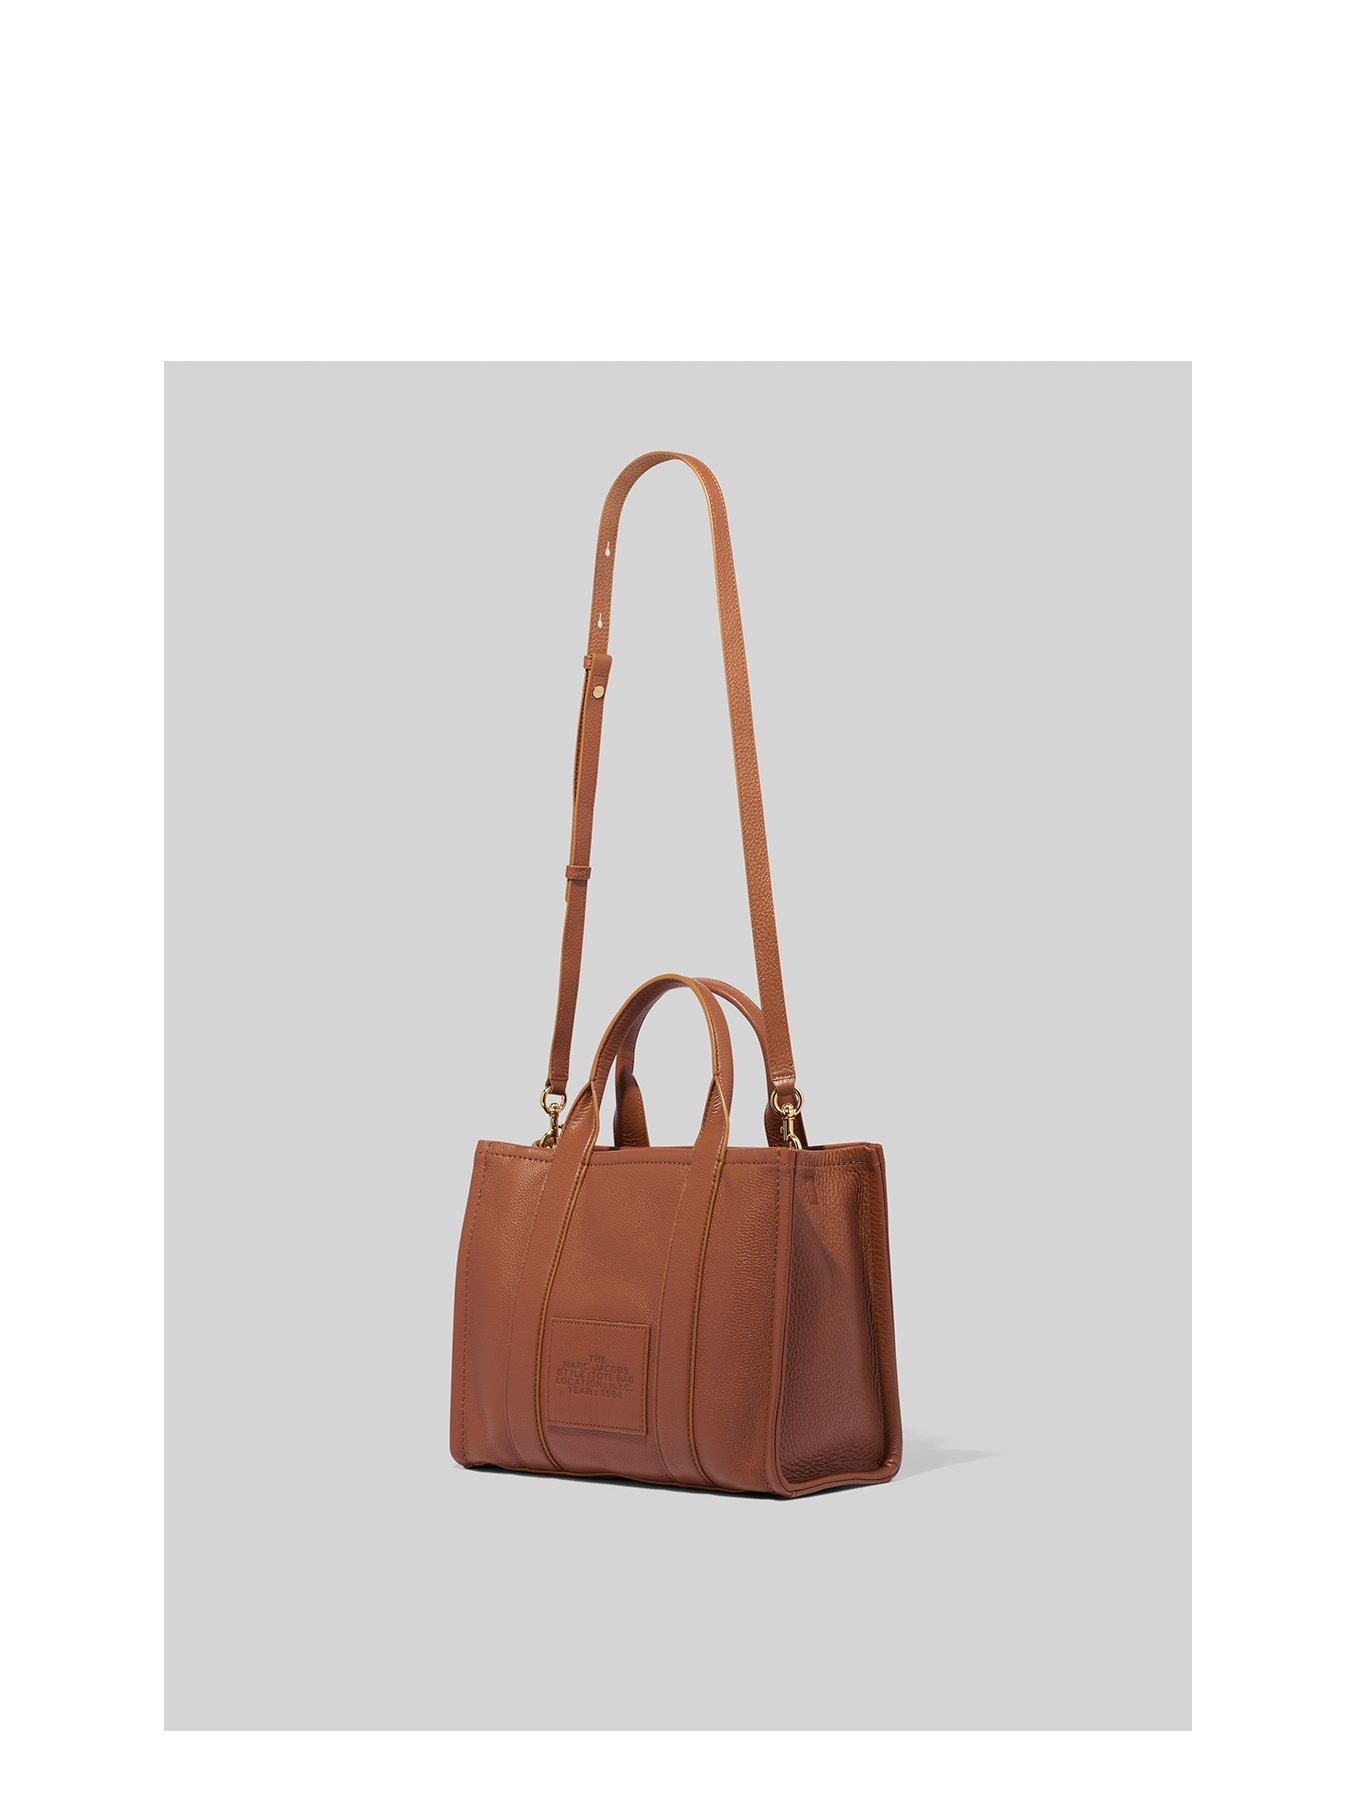 The Large Leather Tote Bag in Brown - Marc Jacobs